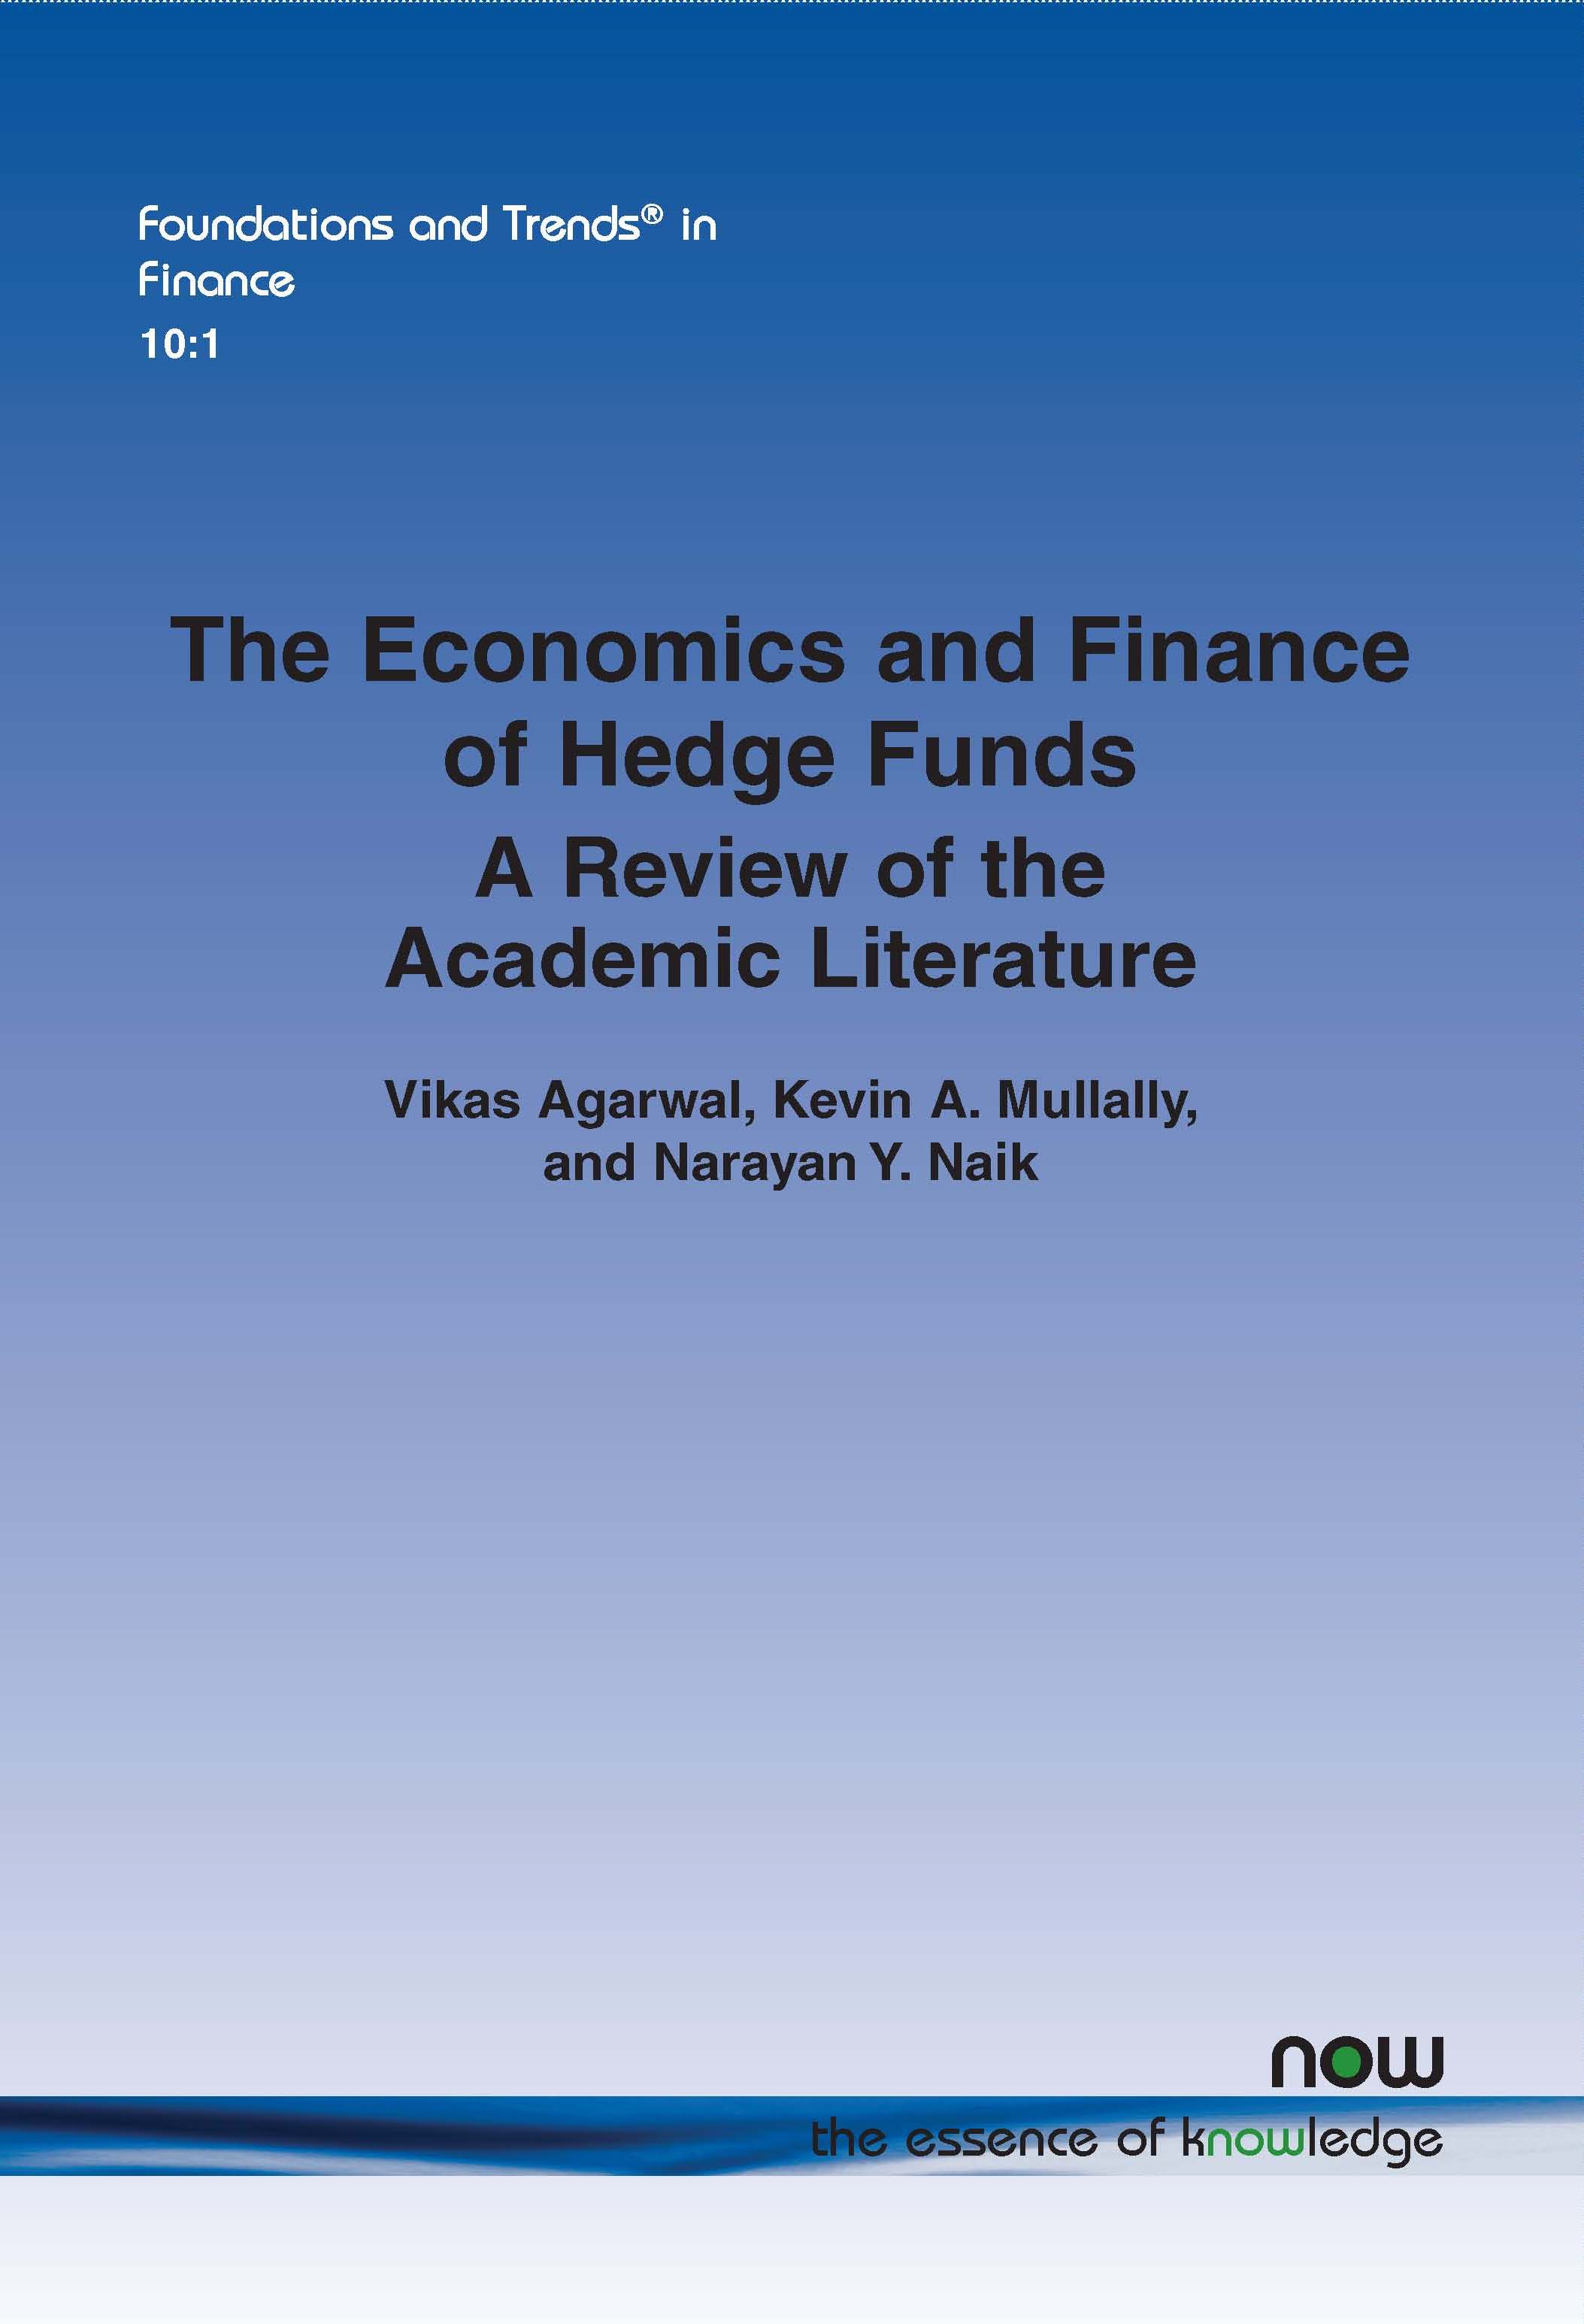 The Economics and Finance of Hedge Funds: A Review of the Academic Literature